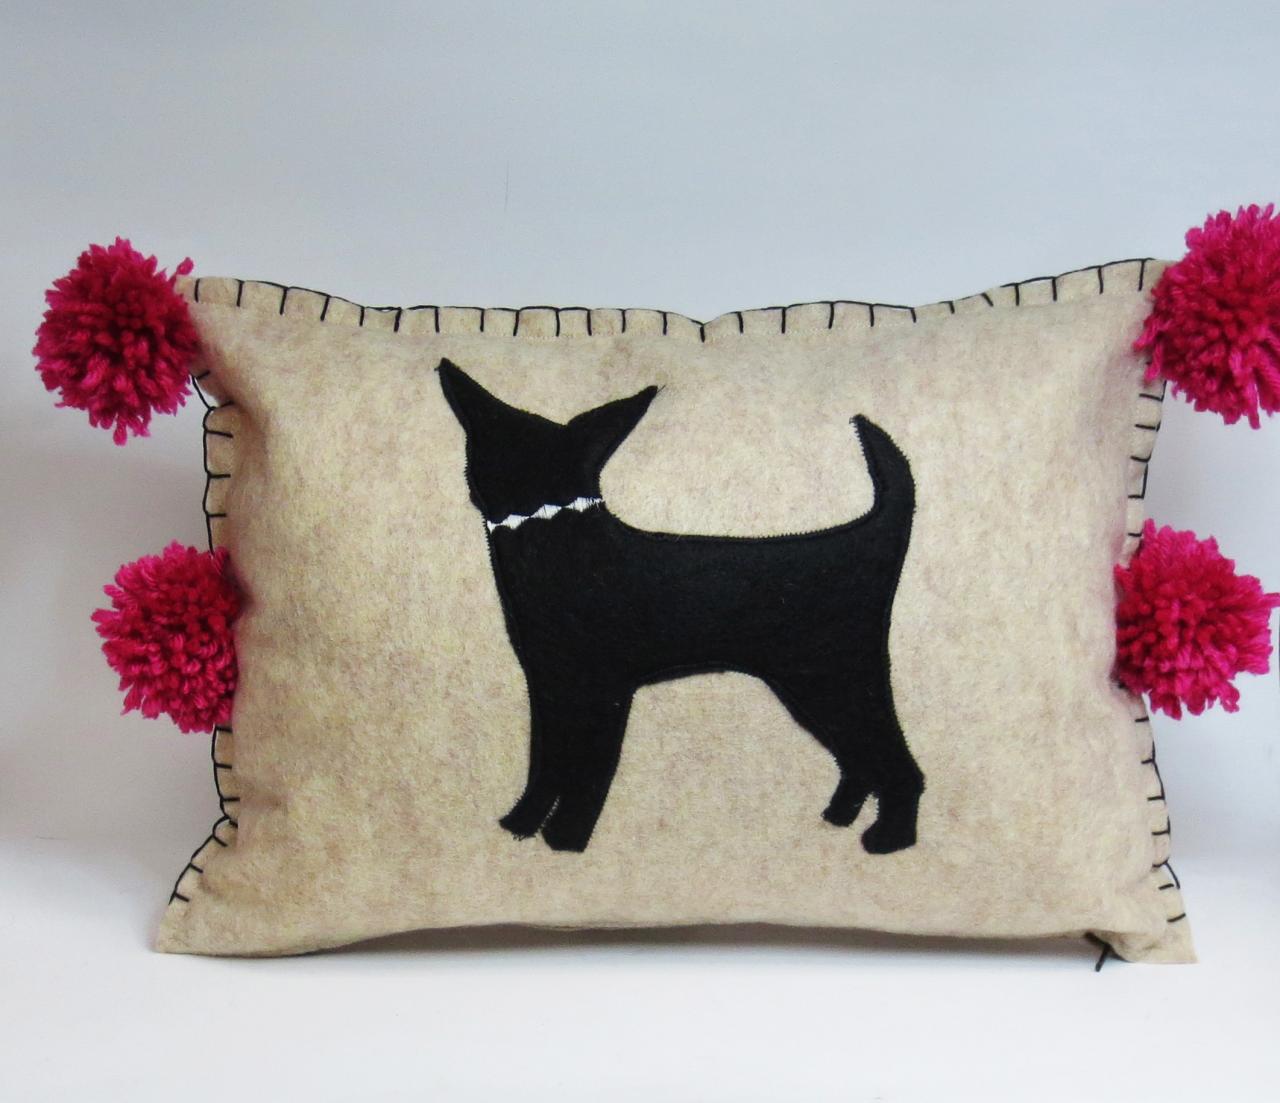 Beige Felt Pillow With Black Chihuahua Silhouette And Pink Accents